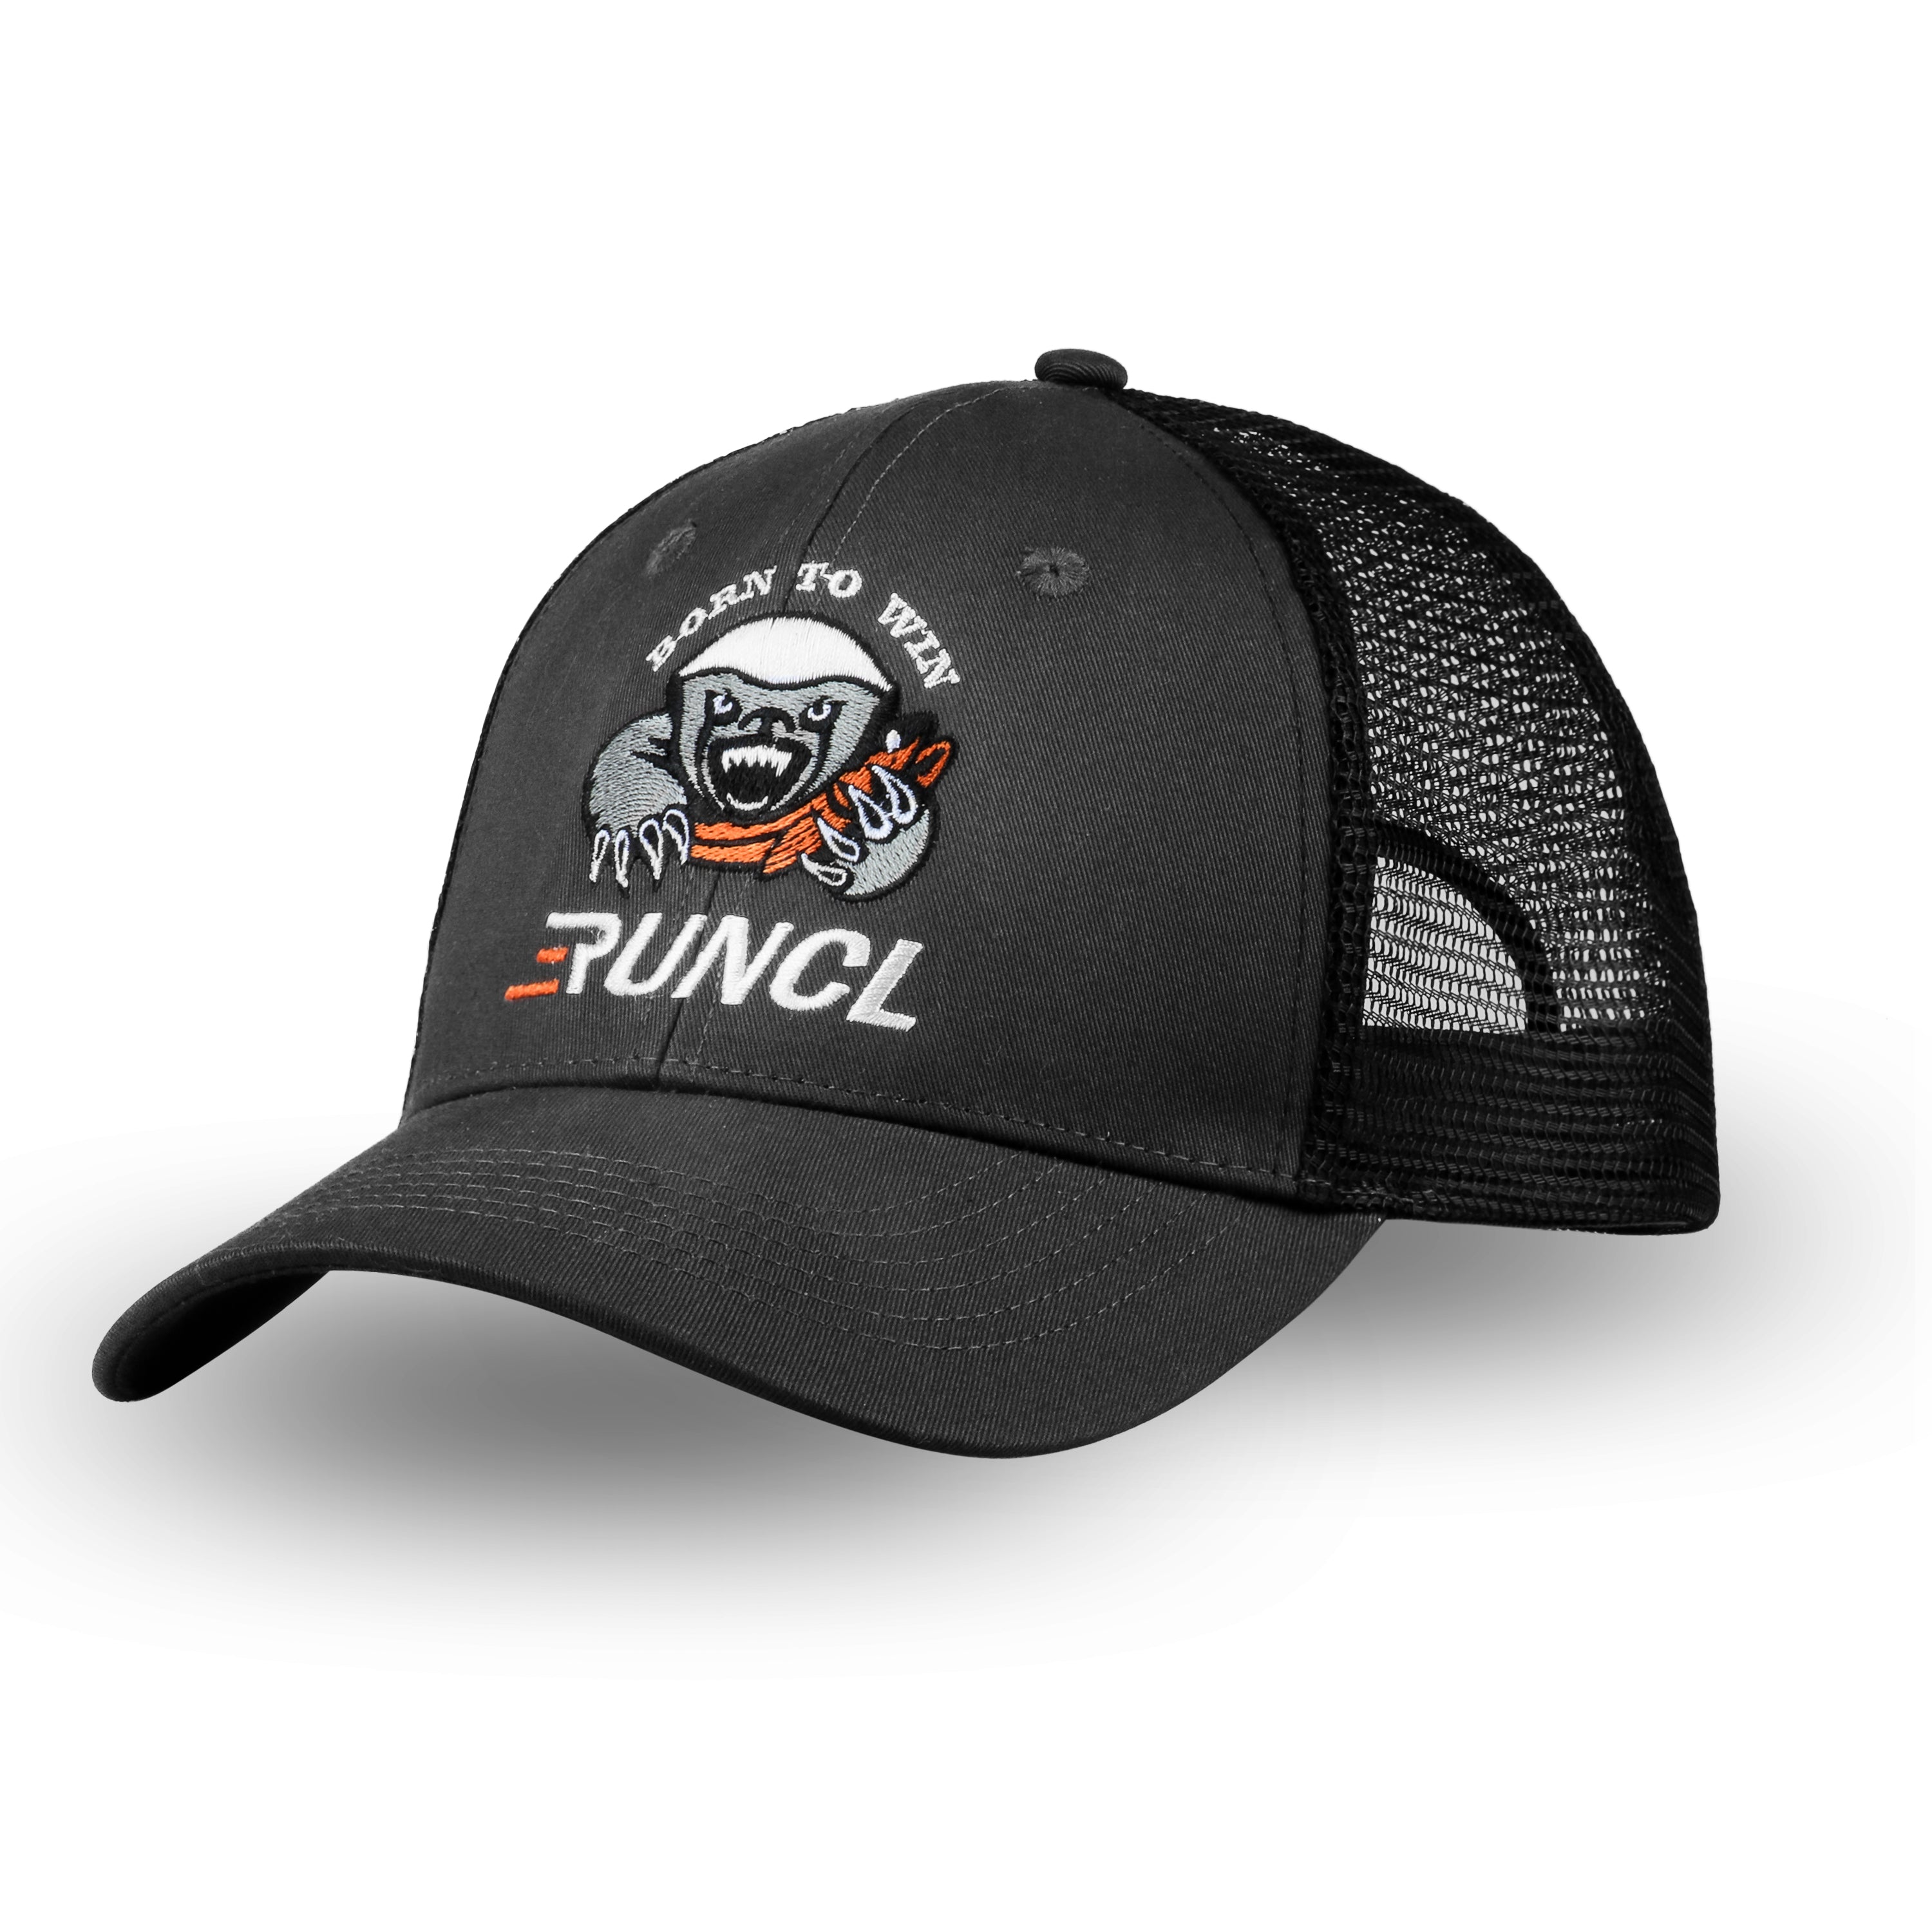 RUNCL Trucker Hat - Great for Fishing or Hunting - OSFM / Grey